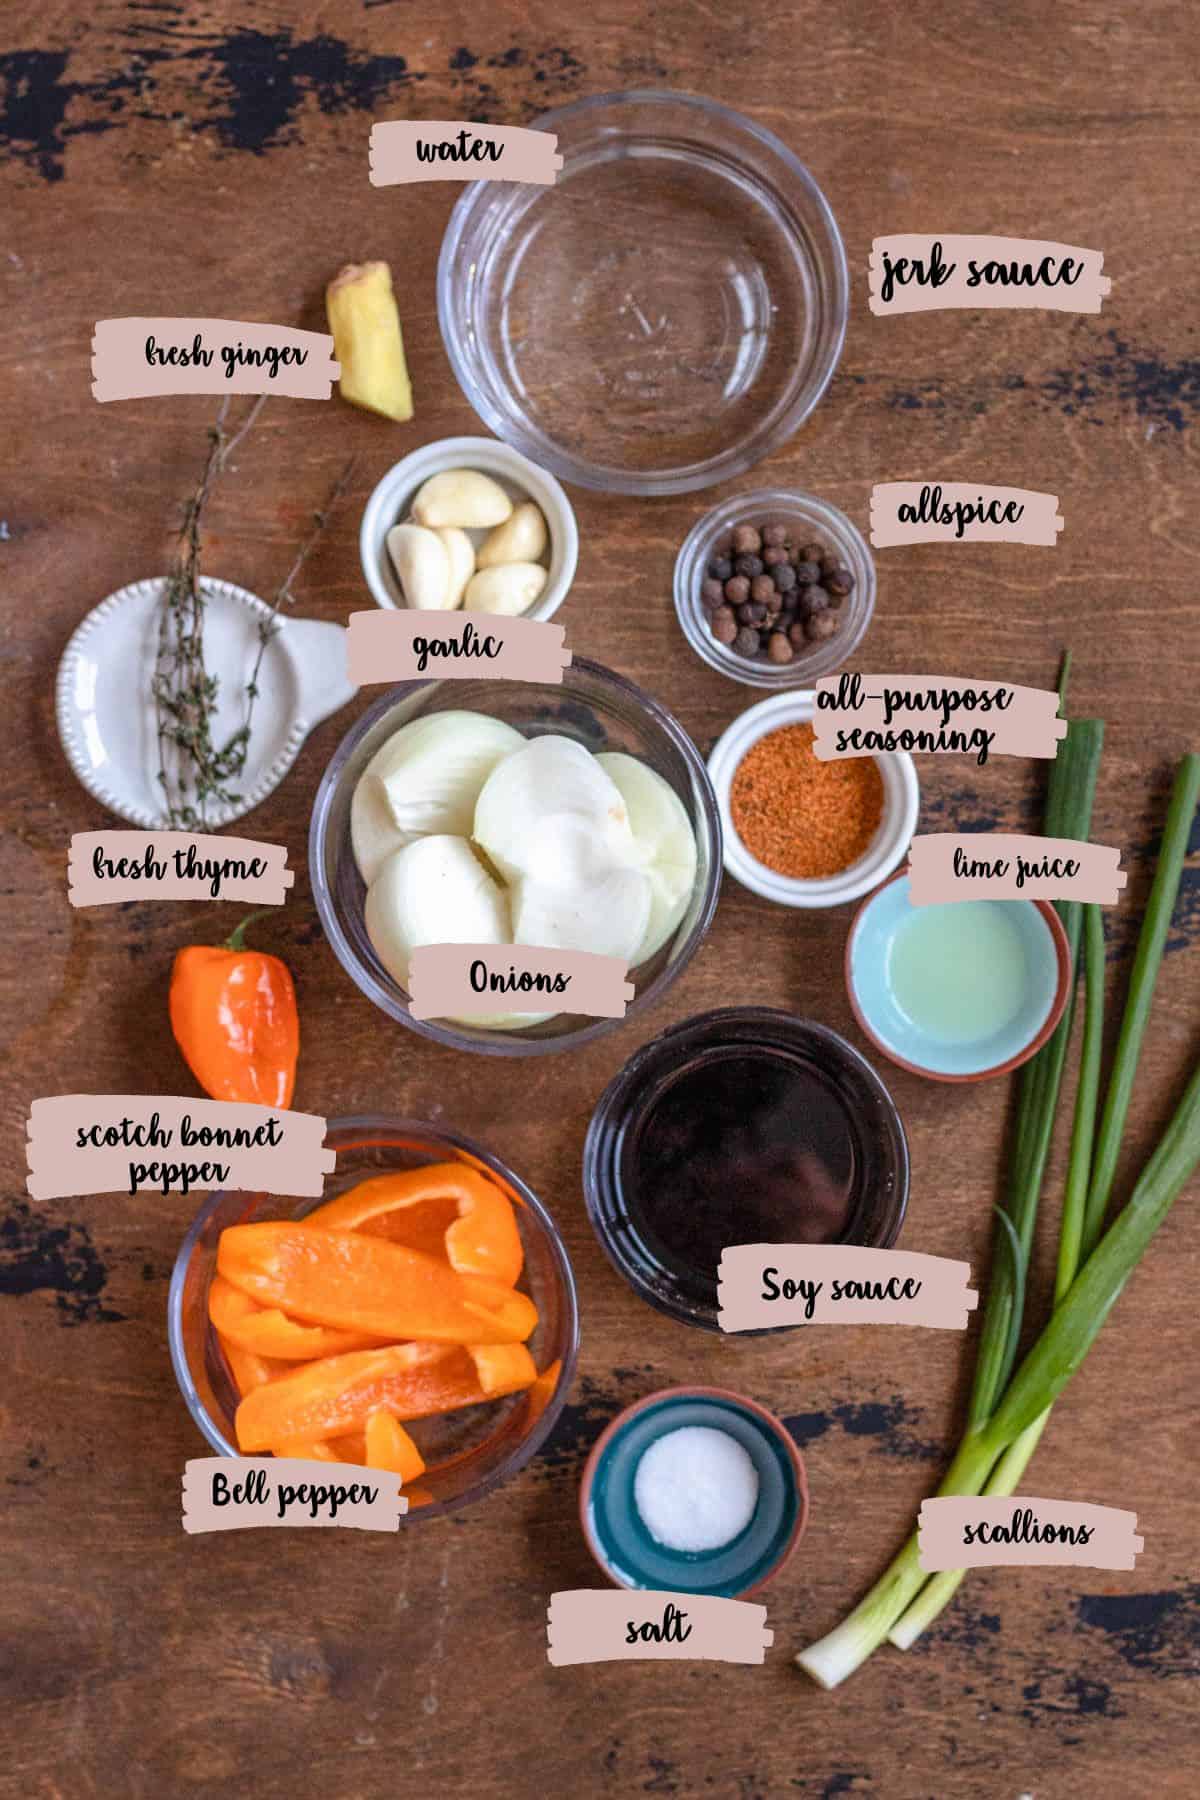 Ingredients shown are used to prepare the jerk sauce. 